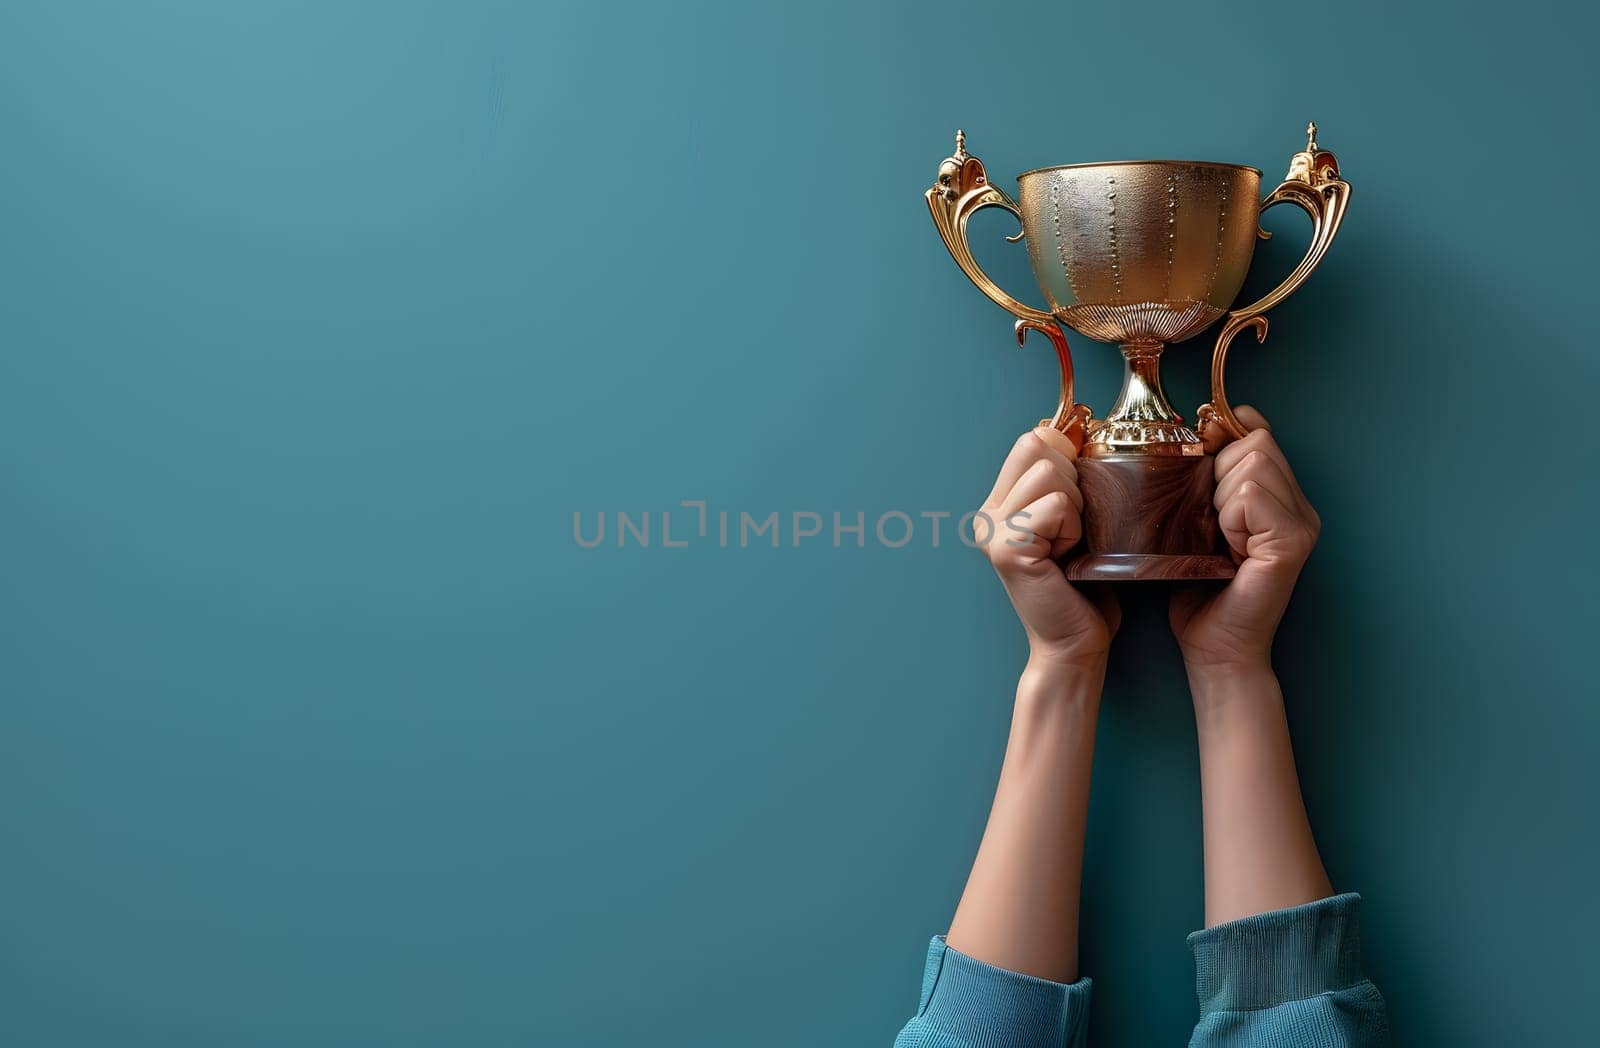 A person is triumphantly holding a gold trophy in their hand, their wrist positioned elegantly. The trophy gleams in the light, a symbol of victory and success